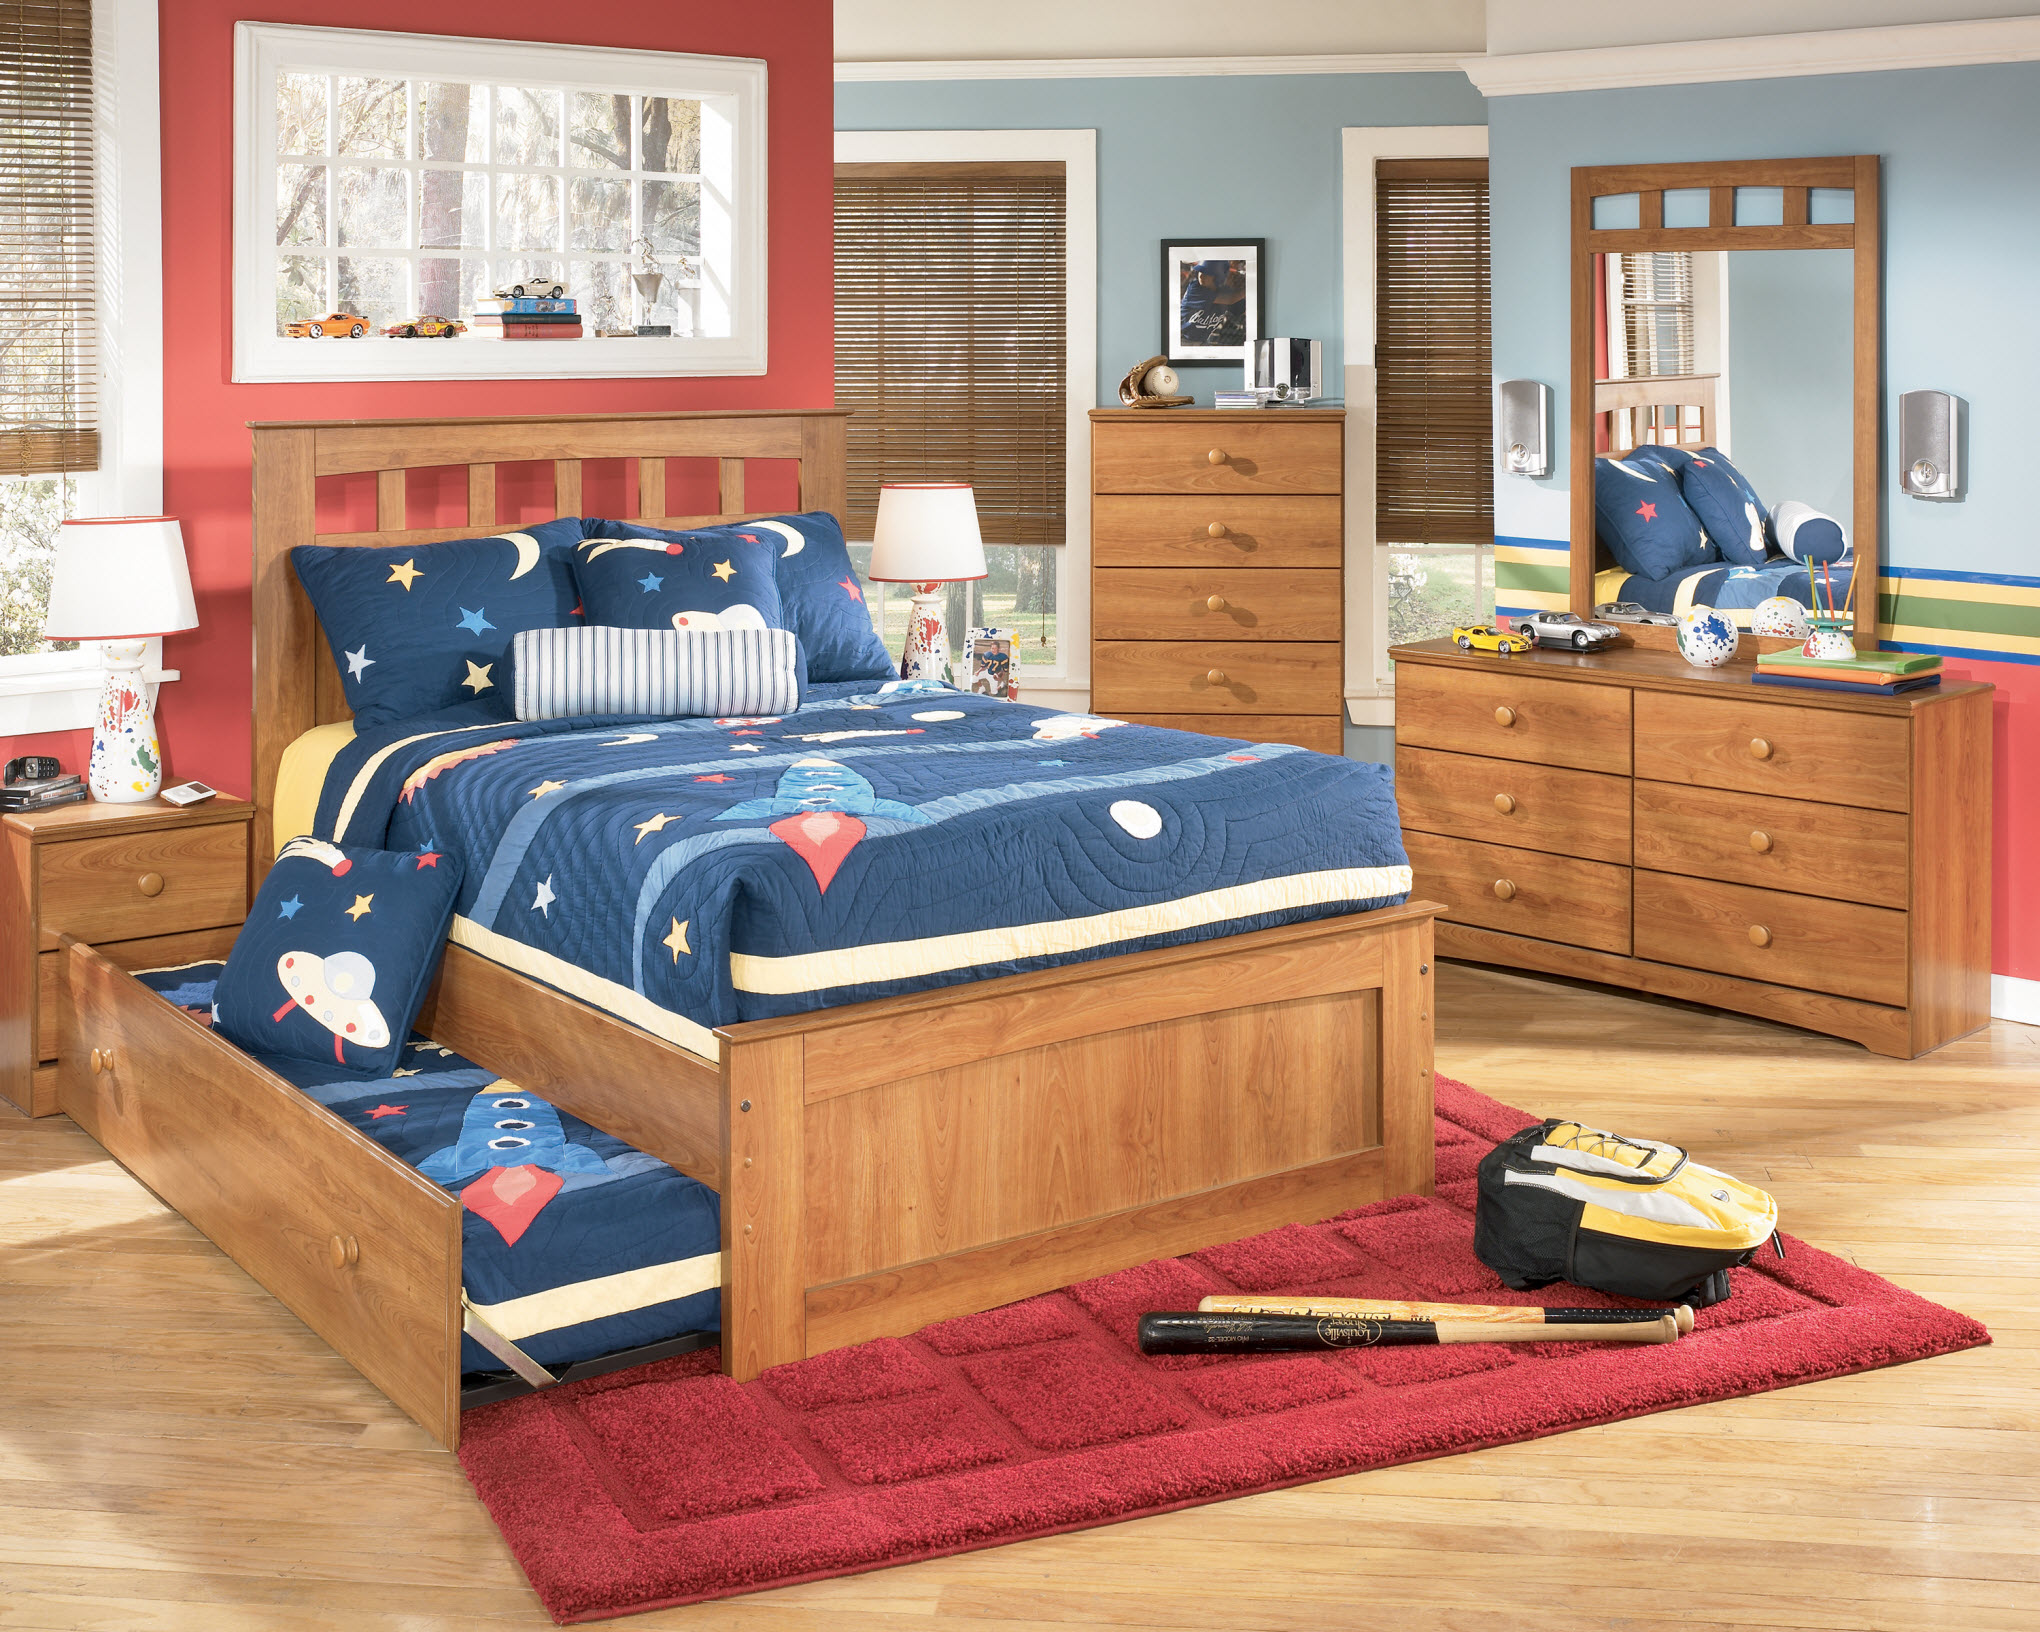 Boys bedroom sets: the great gift for
  your young boy